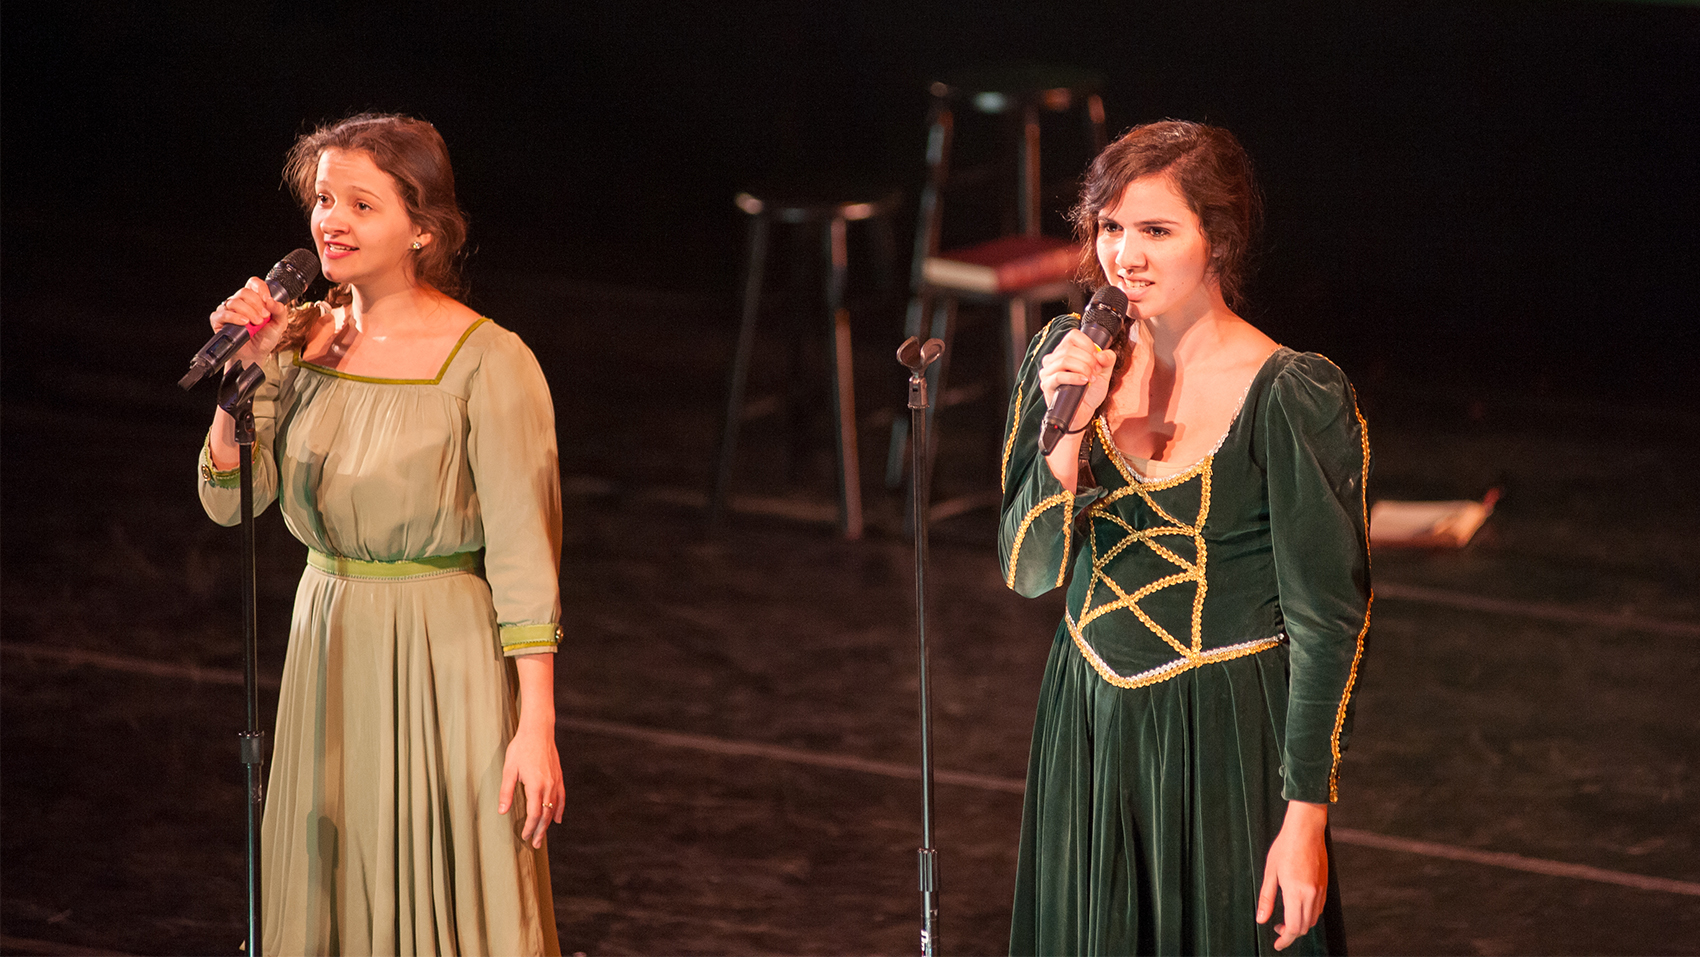 Two women in a beige vintage dress and a darker green and golden embroidered dress sing toward an audience. The girl on the left is holding the microphone in the stand, the other is holding the microphone off the stand. 